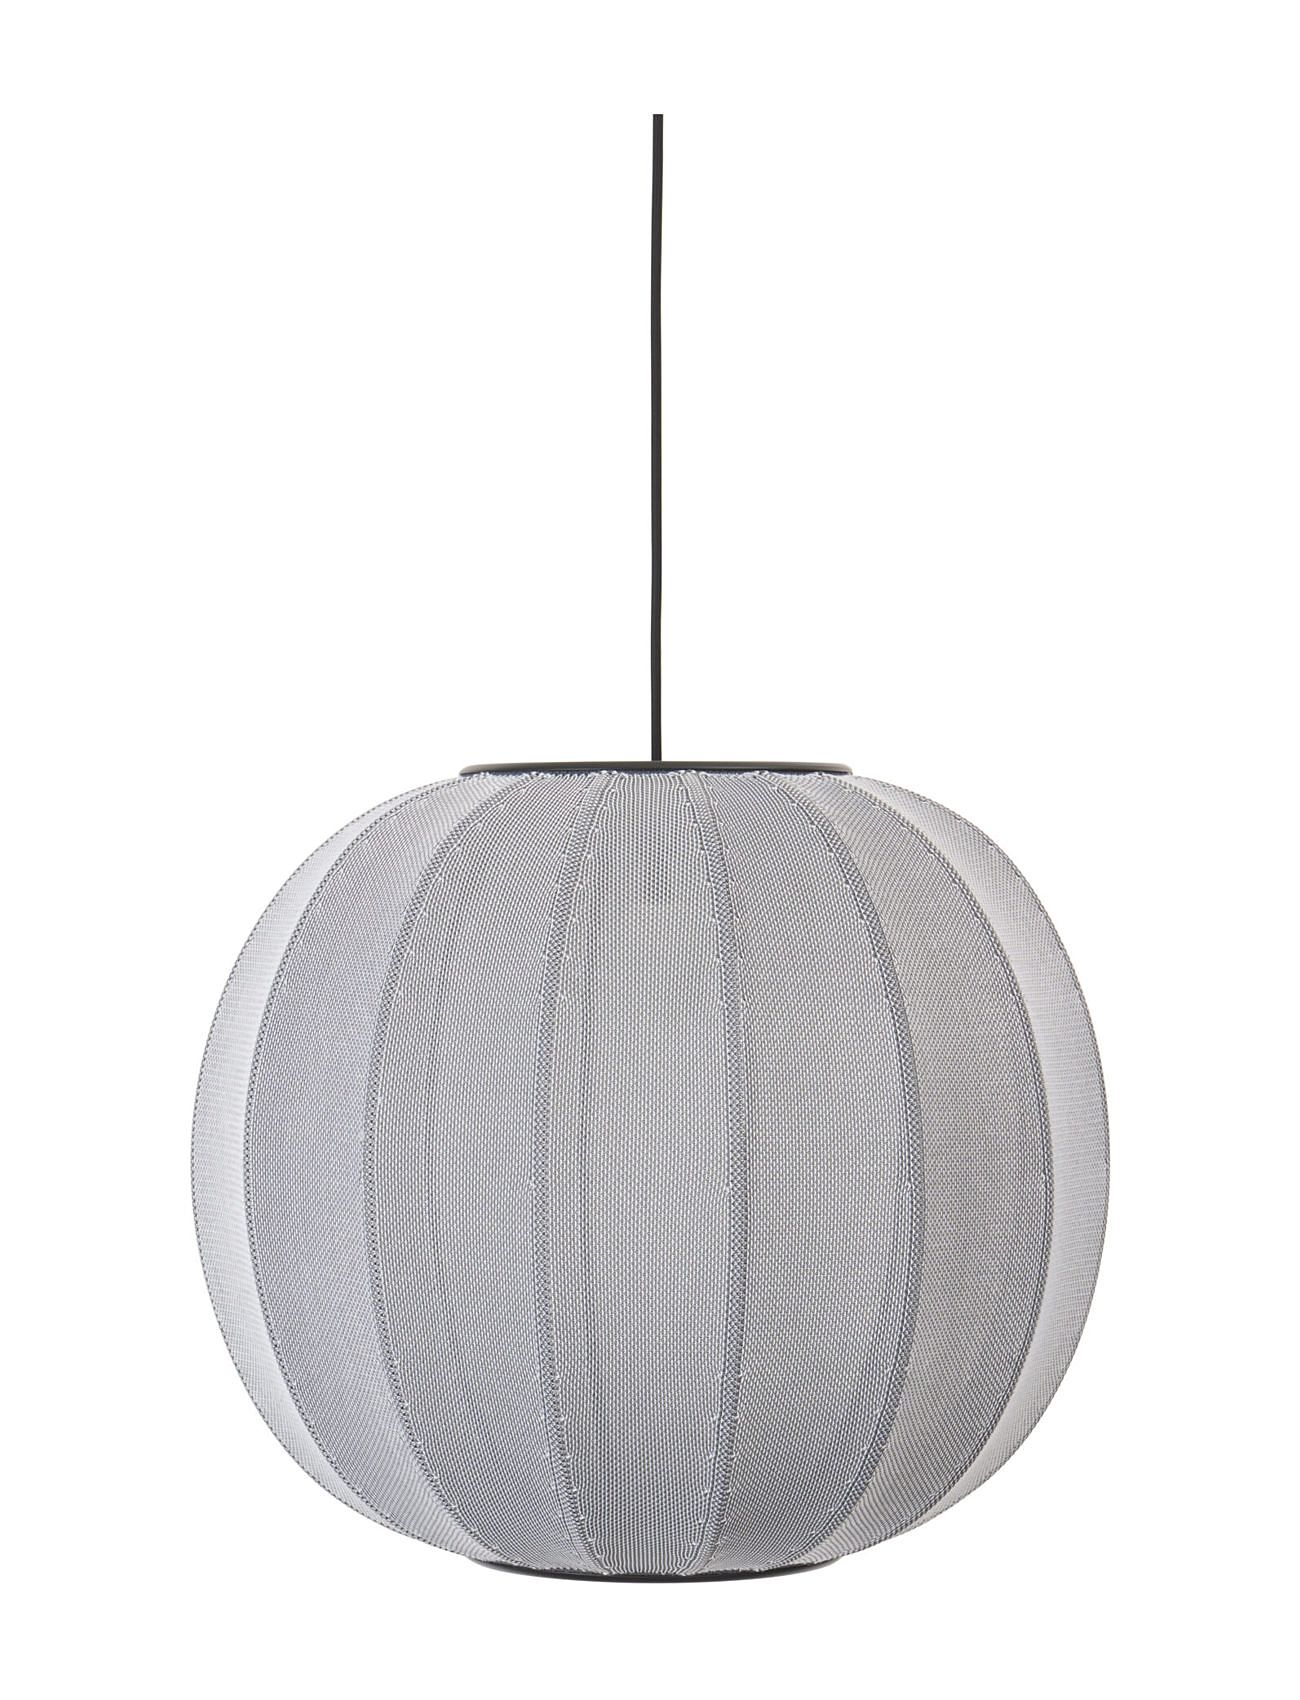 Knit-Wit 45 Round Pendant Home Lighting Lamps Ceiling Lamps Pendant Lamps Grey Made By Hand